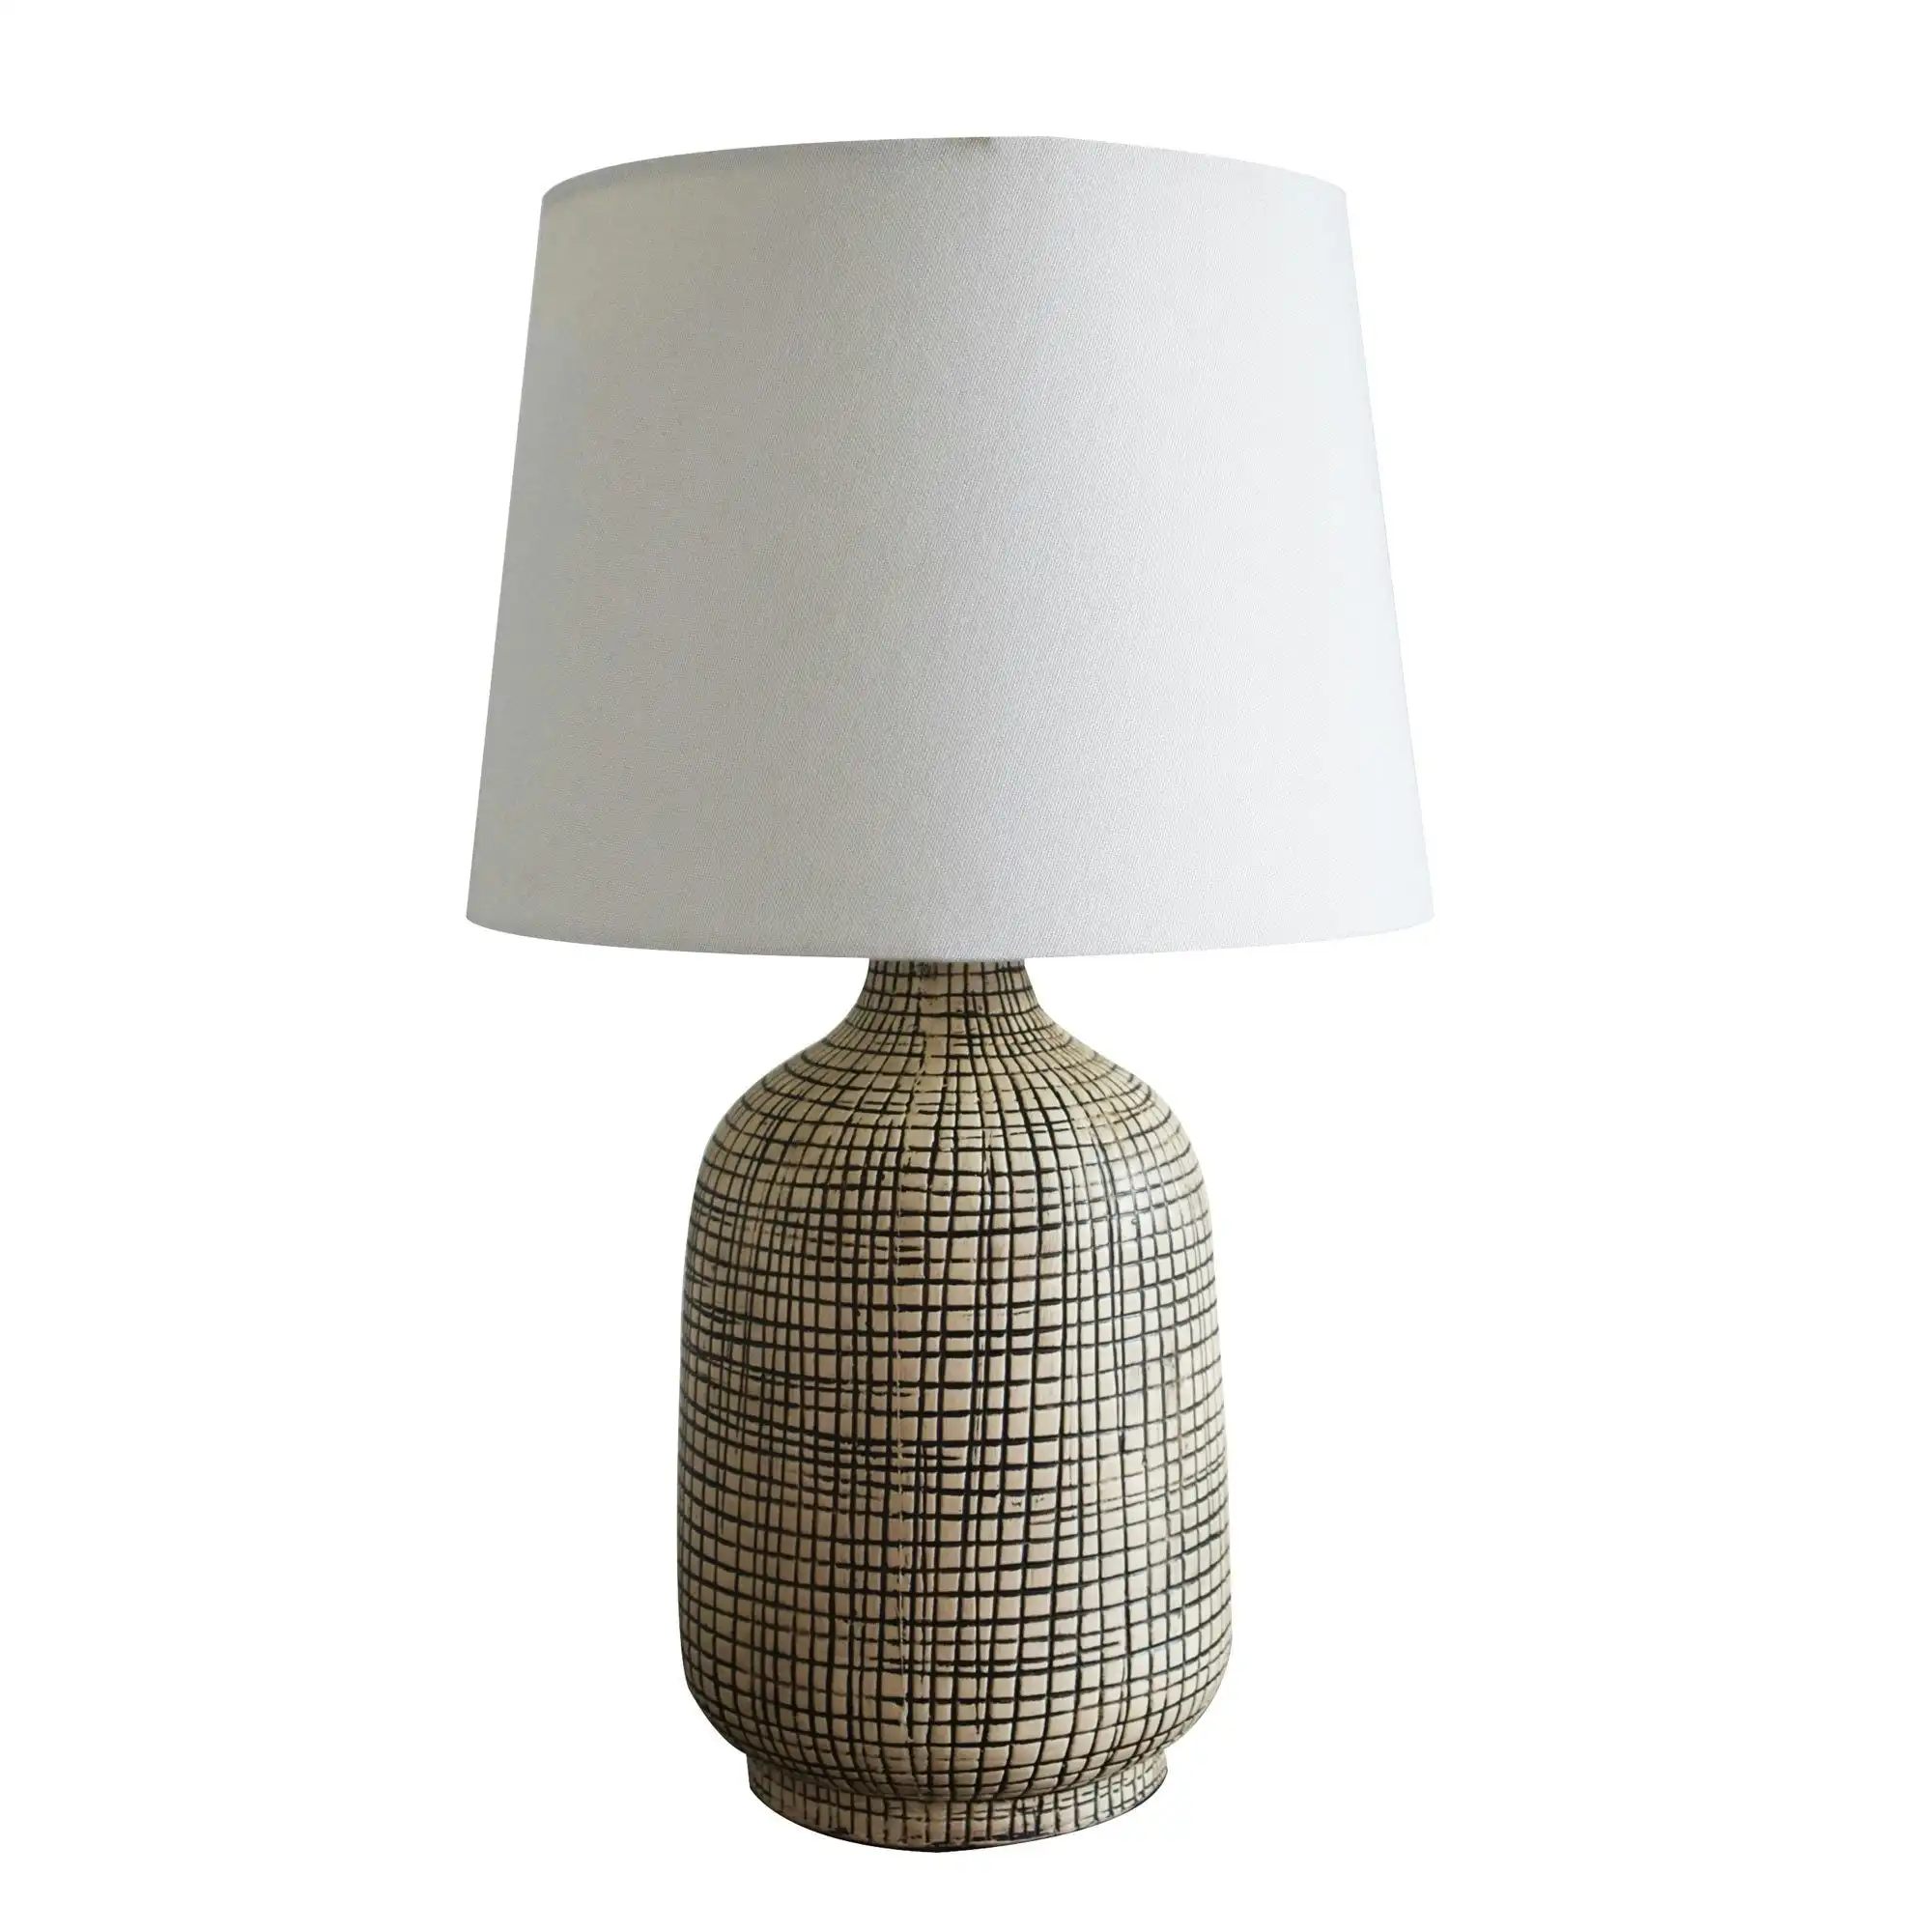 BISCAY Complete Ceramic Table Lamp